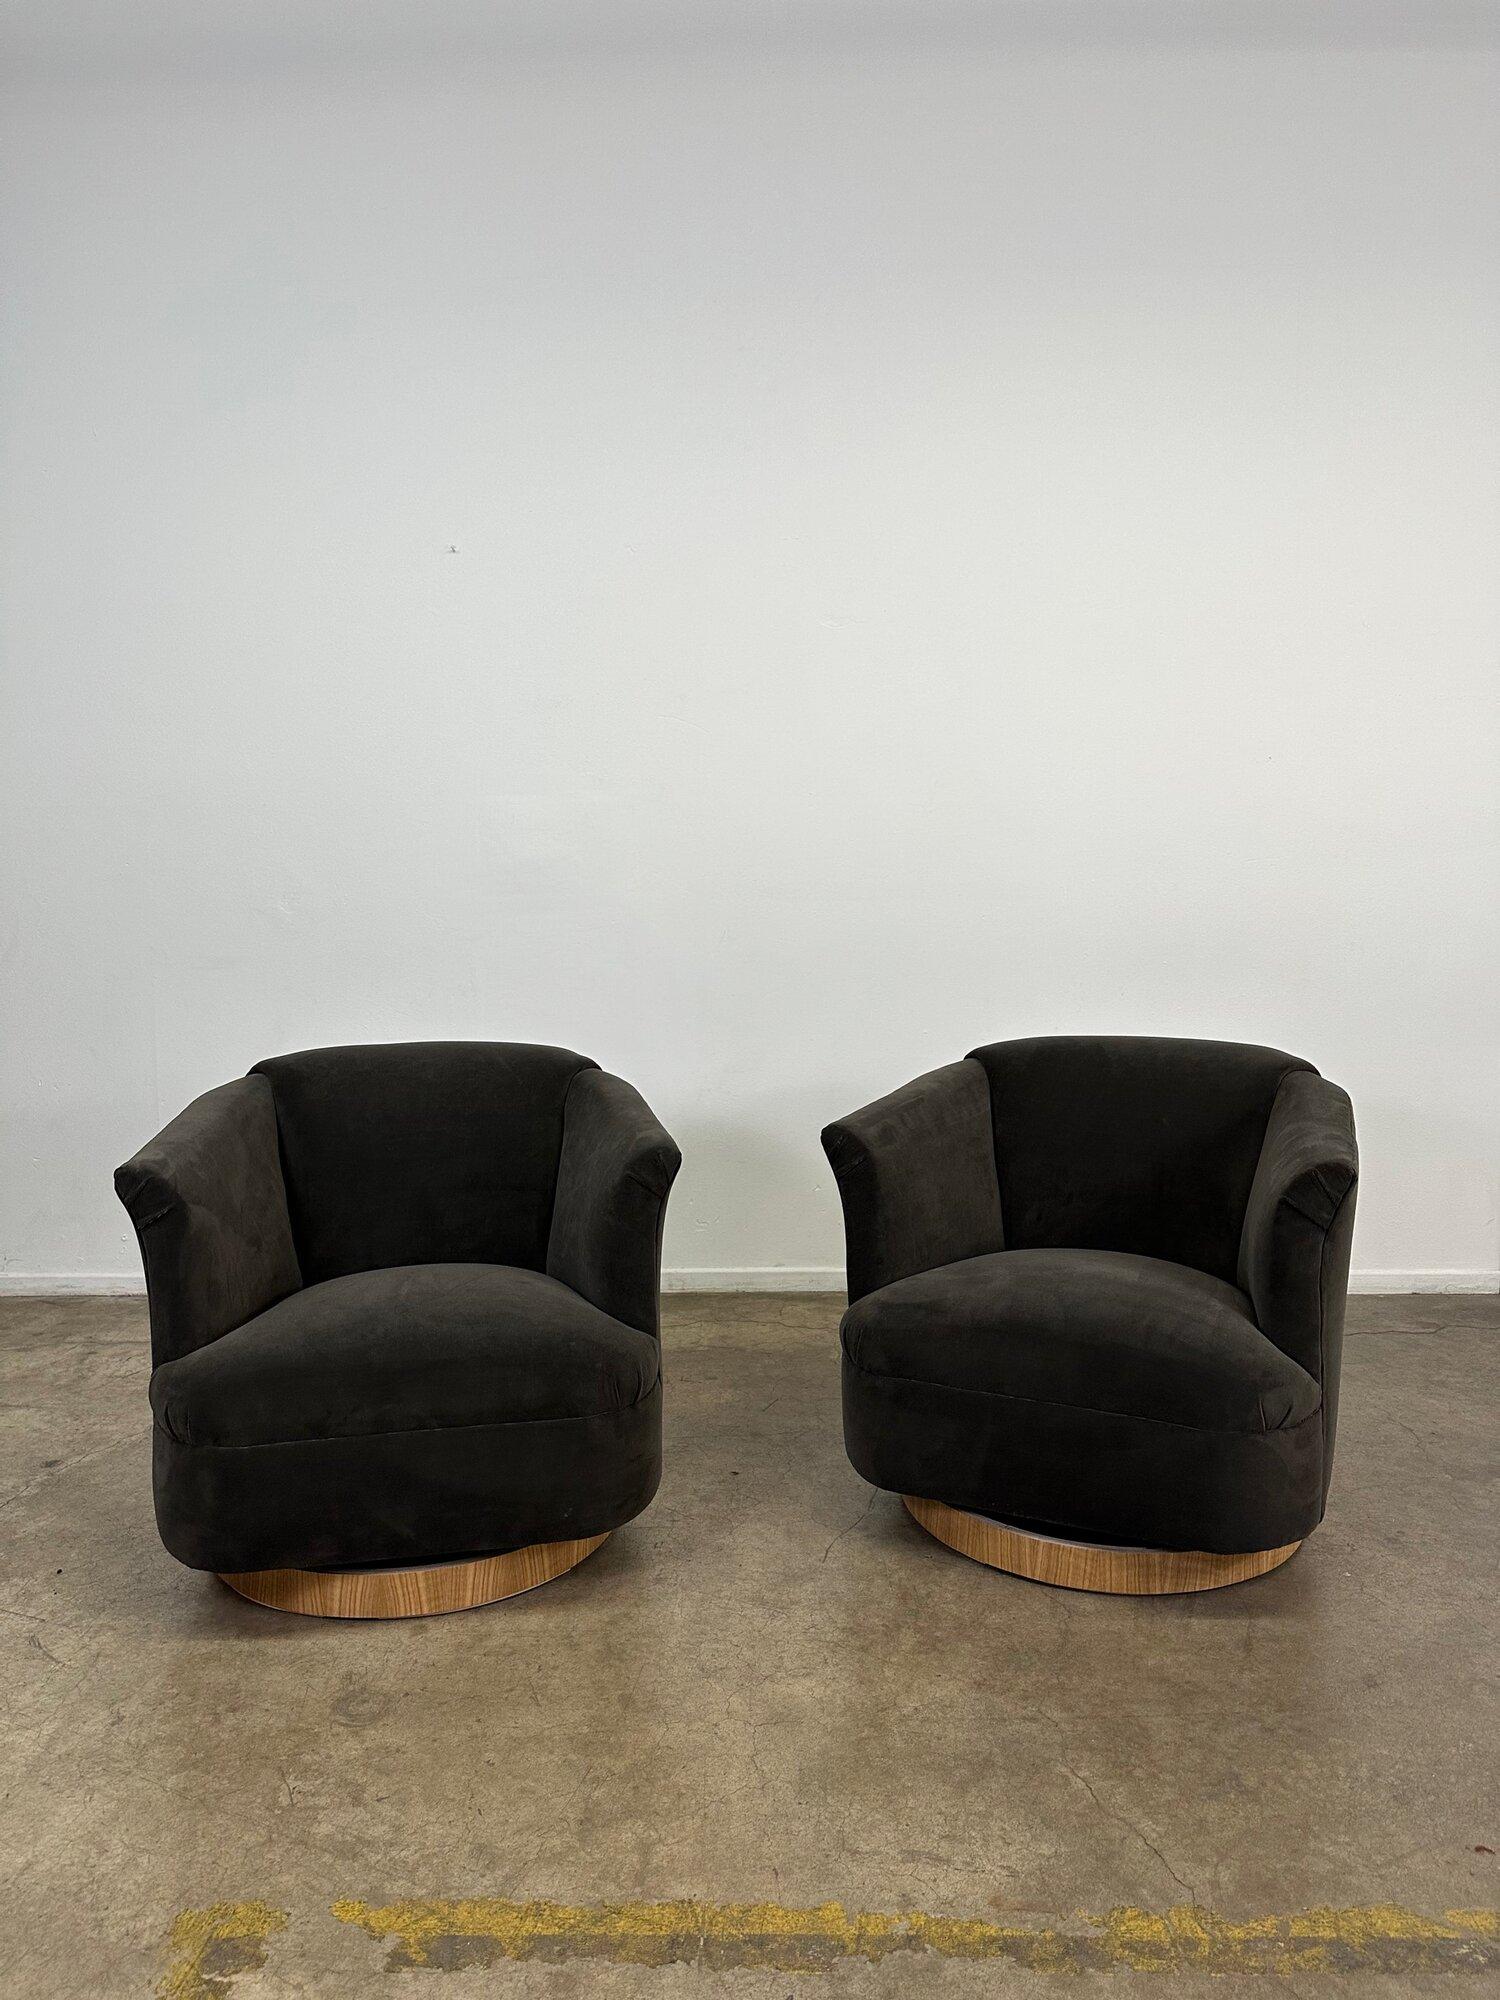 Upholstery Velvet Charcoal Barrel Chairs with White Oak Plinths